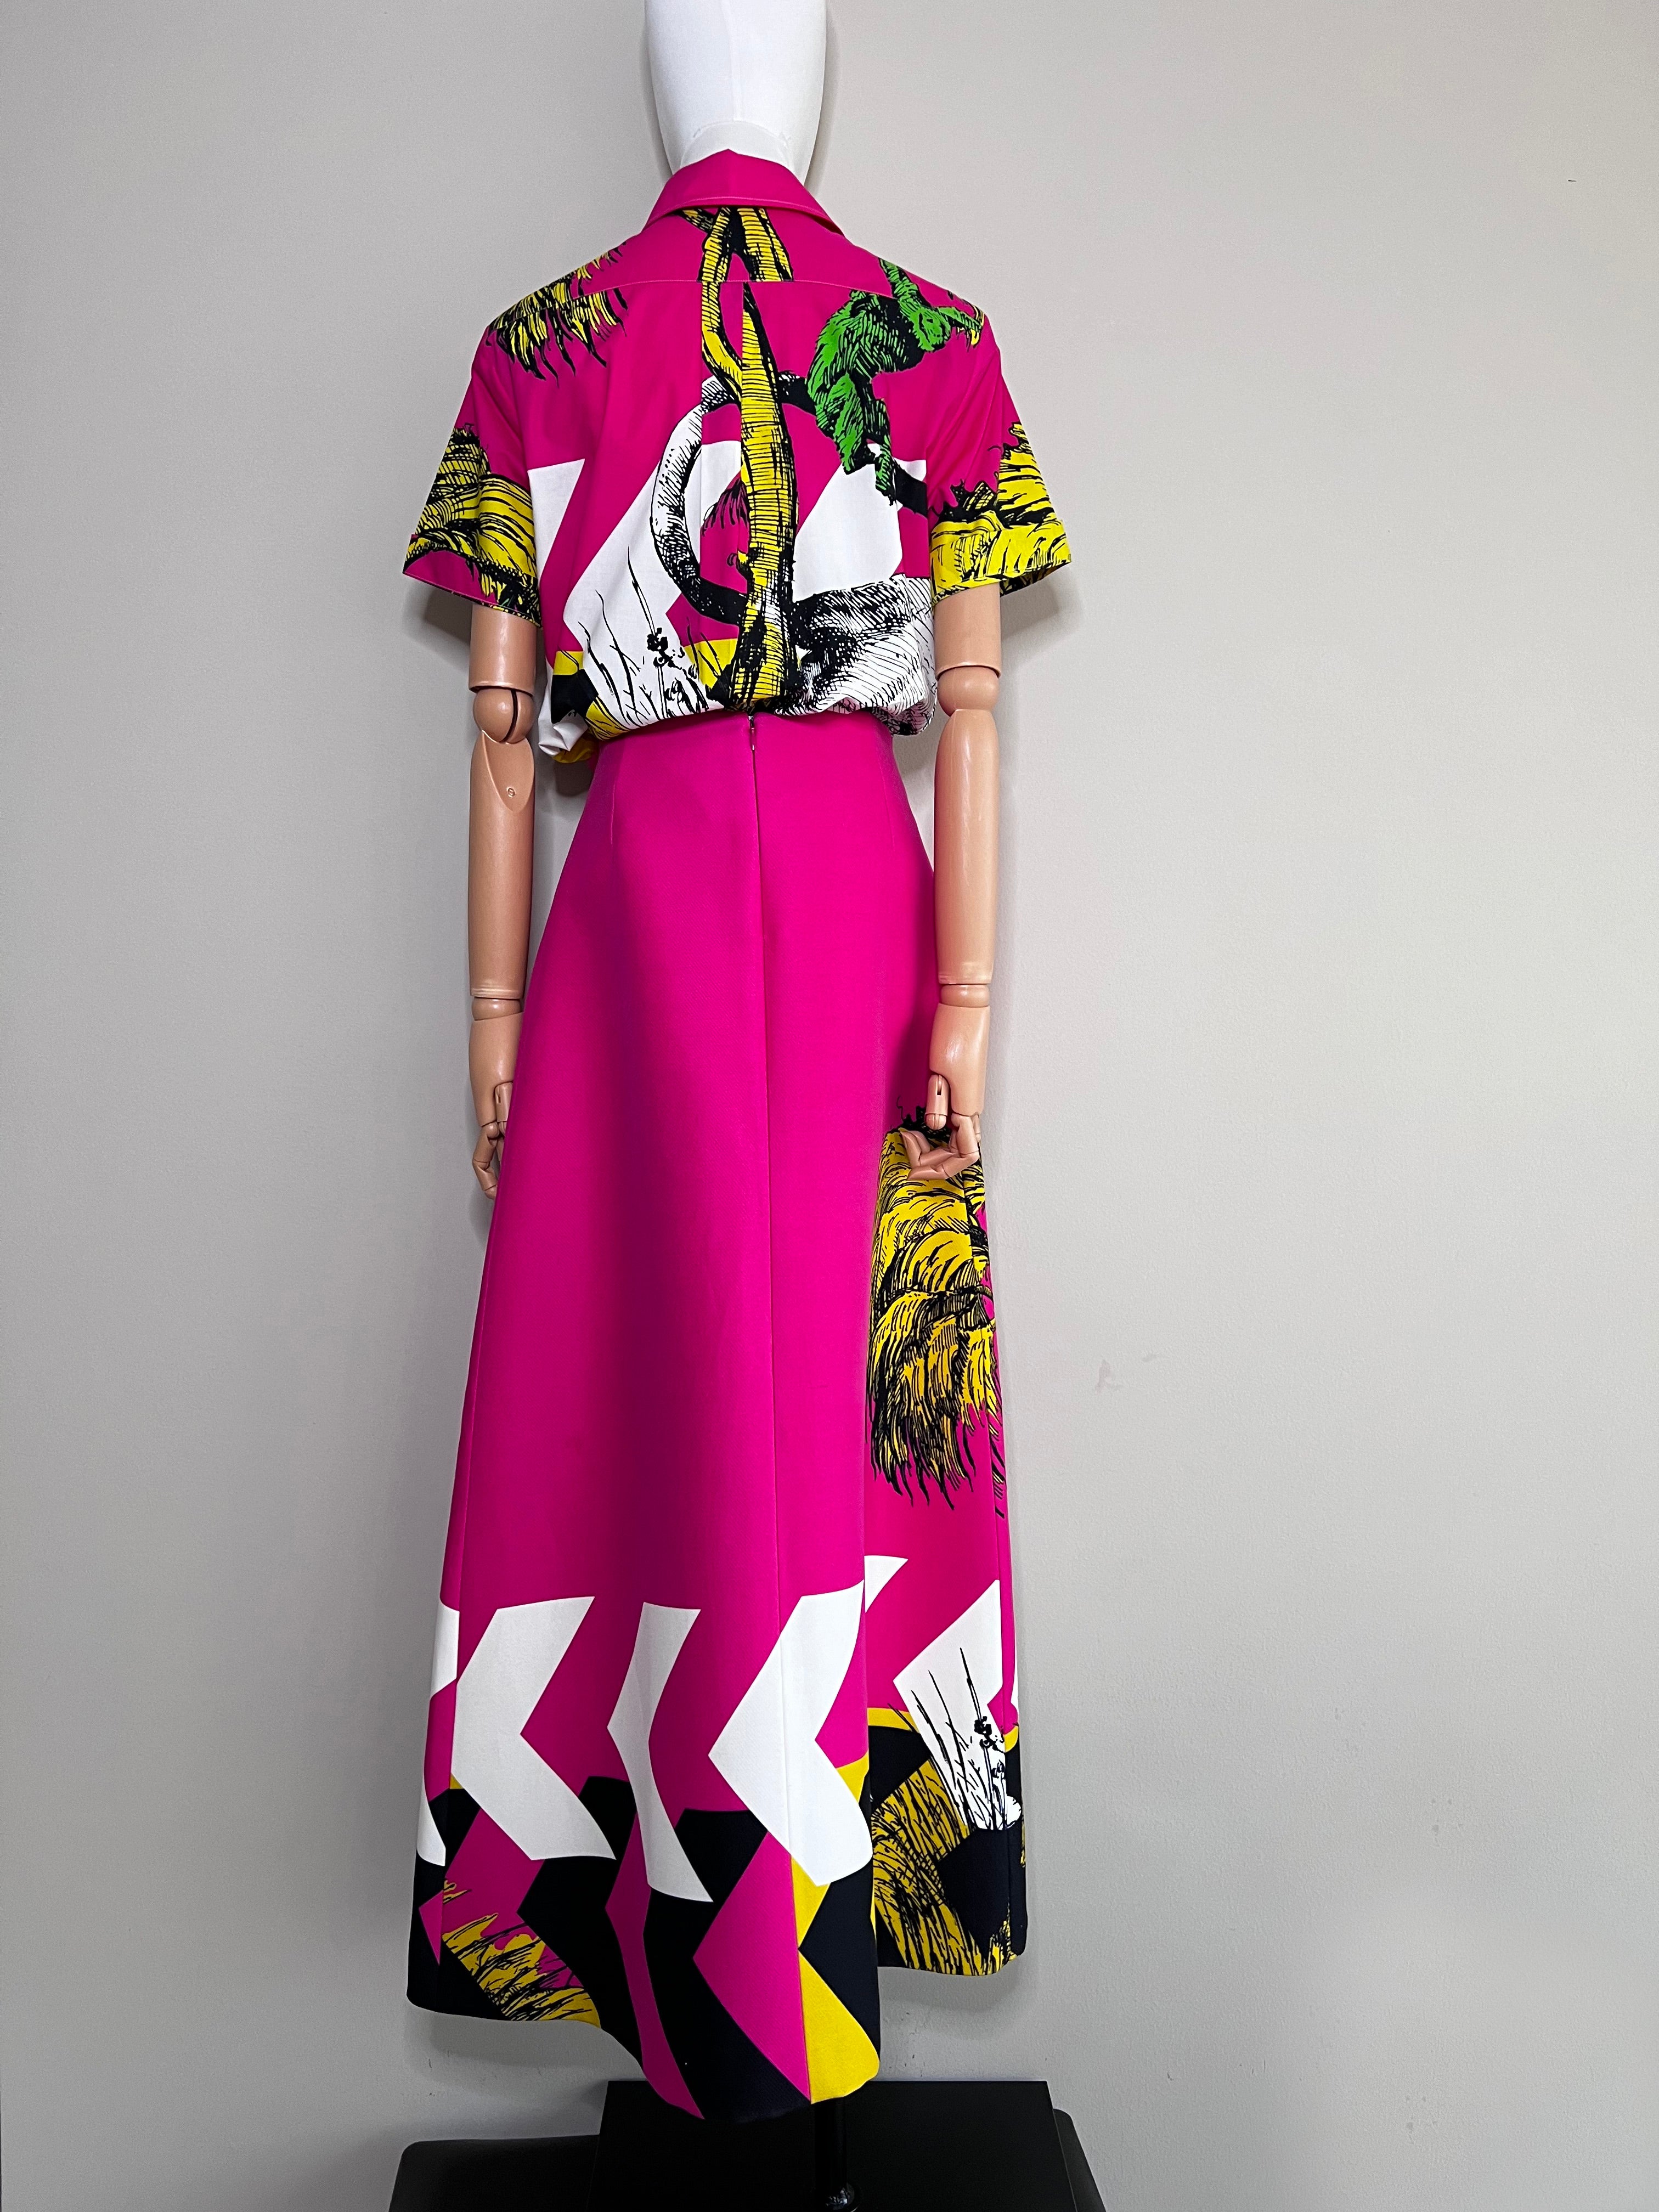 A set of Short-Sleeved Blouse & midi Skirt Pink Cotton Poplin with Multicolor D-Tiger Pop Motif - CHRISTIAN DIOR